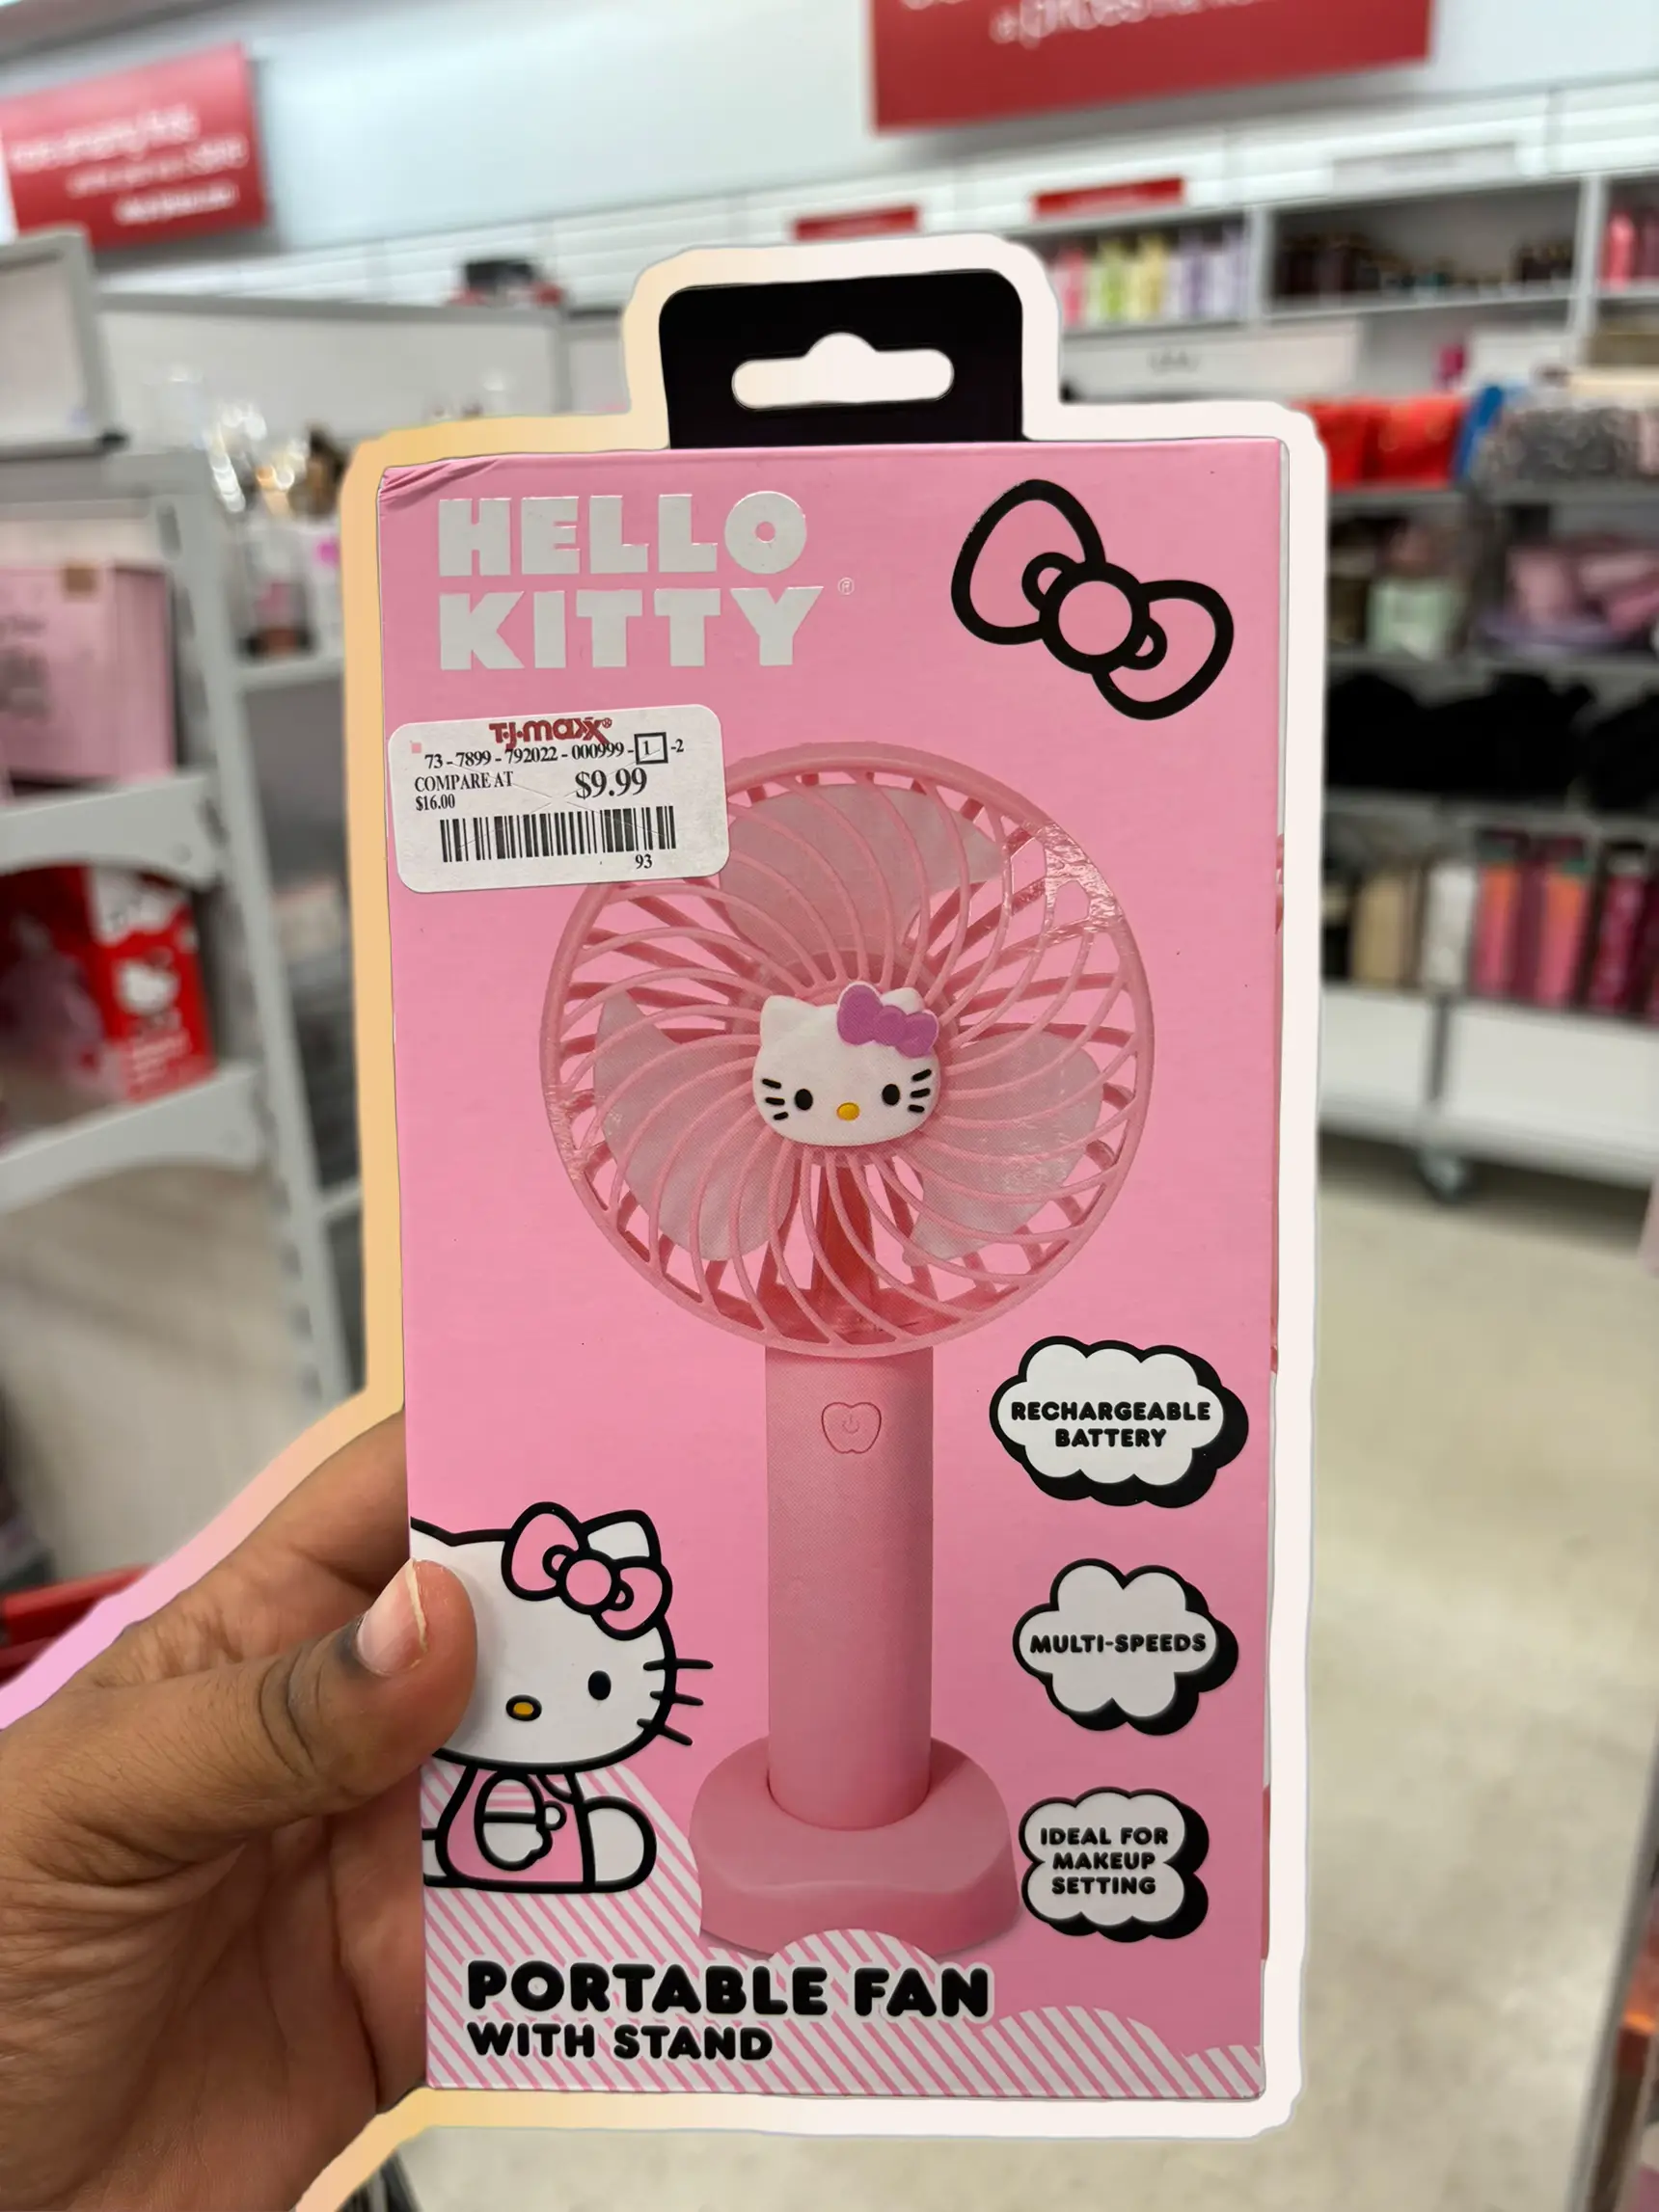 Hello Kitty 5-Pack Toothbrush Set Just $9.99 at Costco, Awesome Stocking  Stuffer